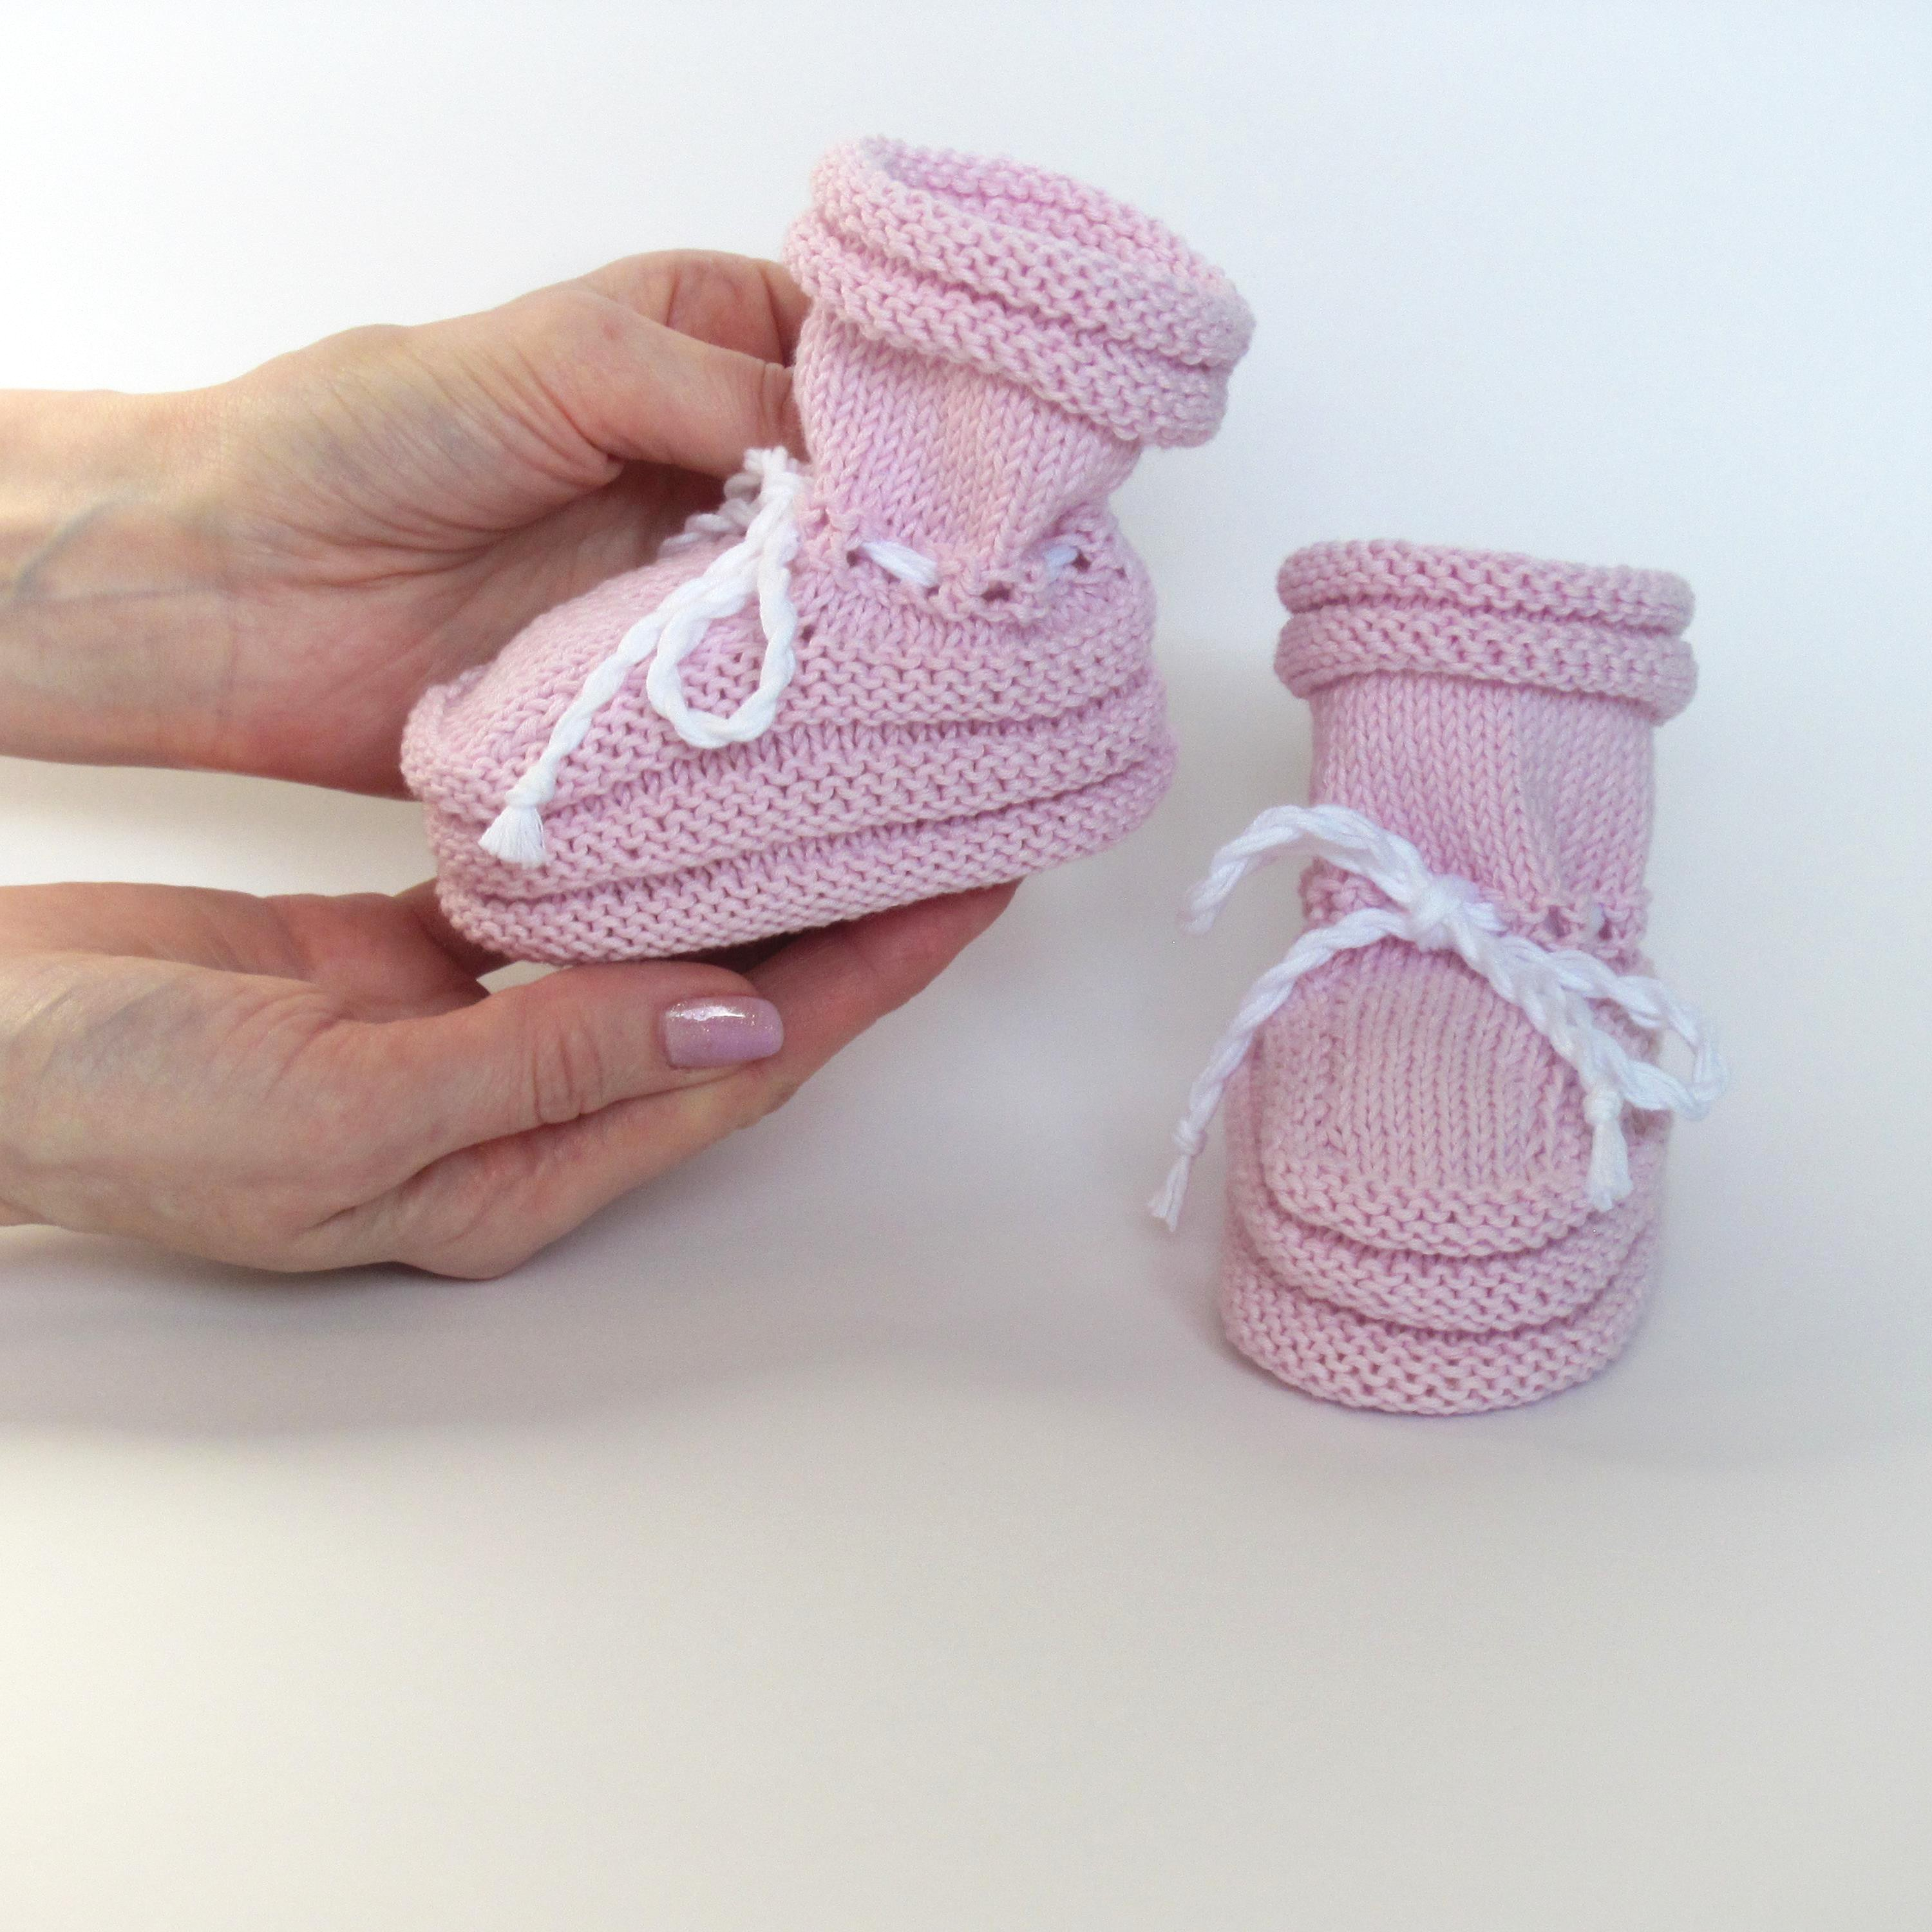 Knitting Patterns For Baby Booties Knit Ba Booties Illustrated Knitting Pattern